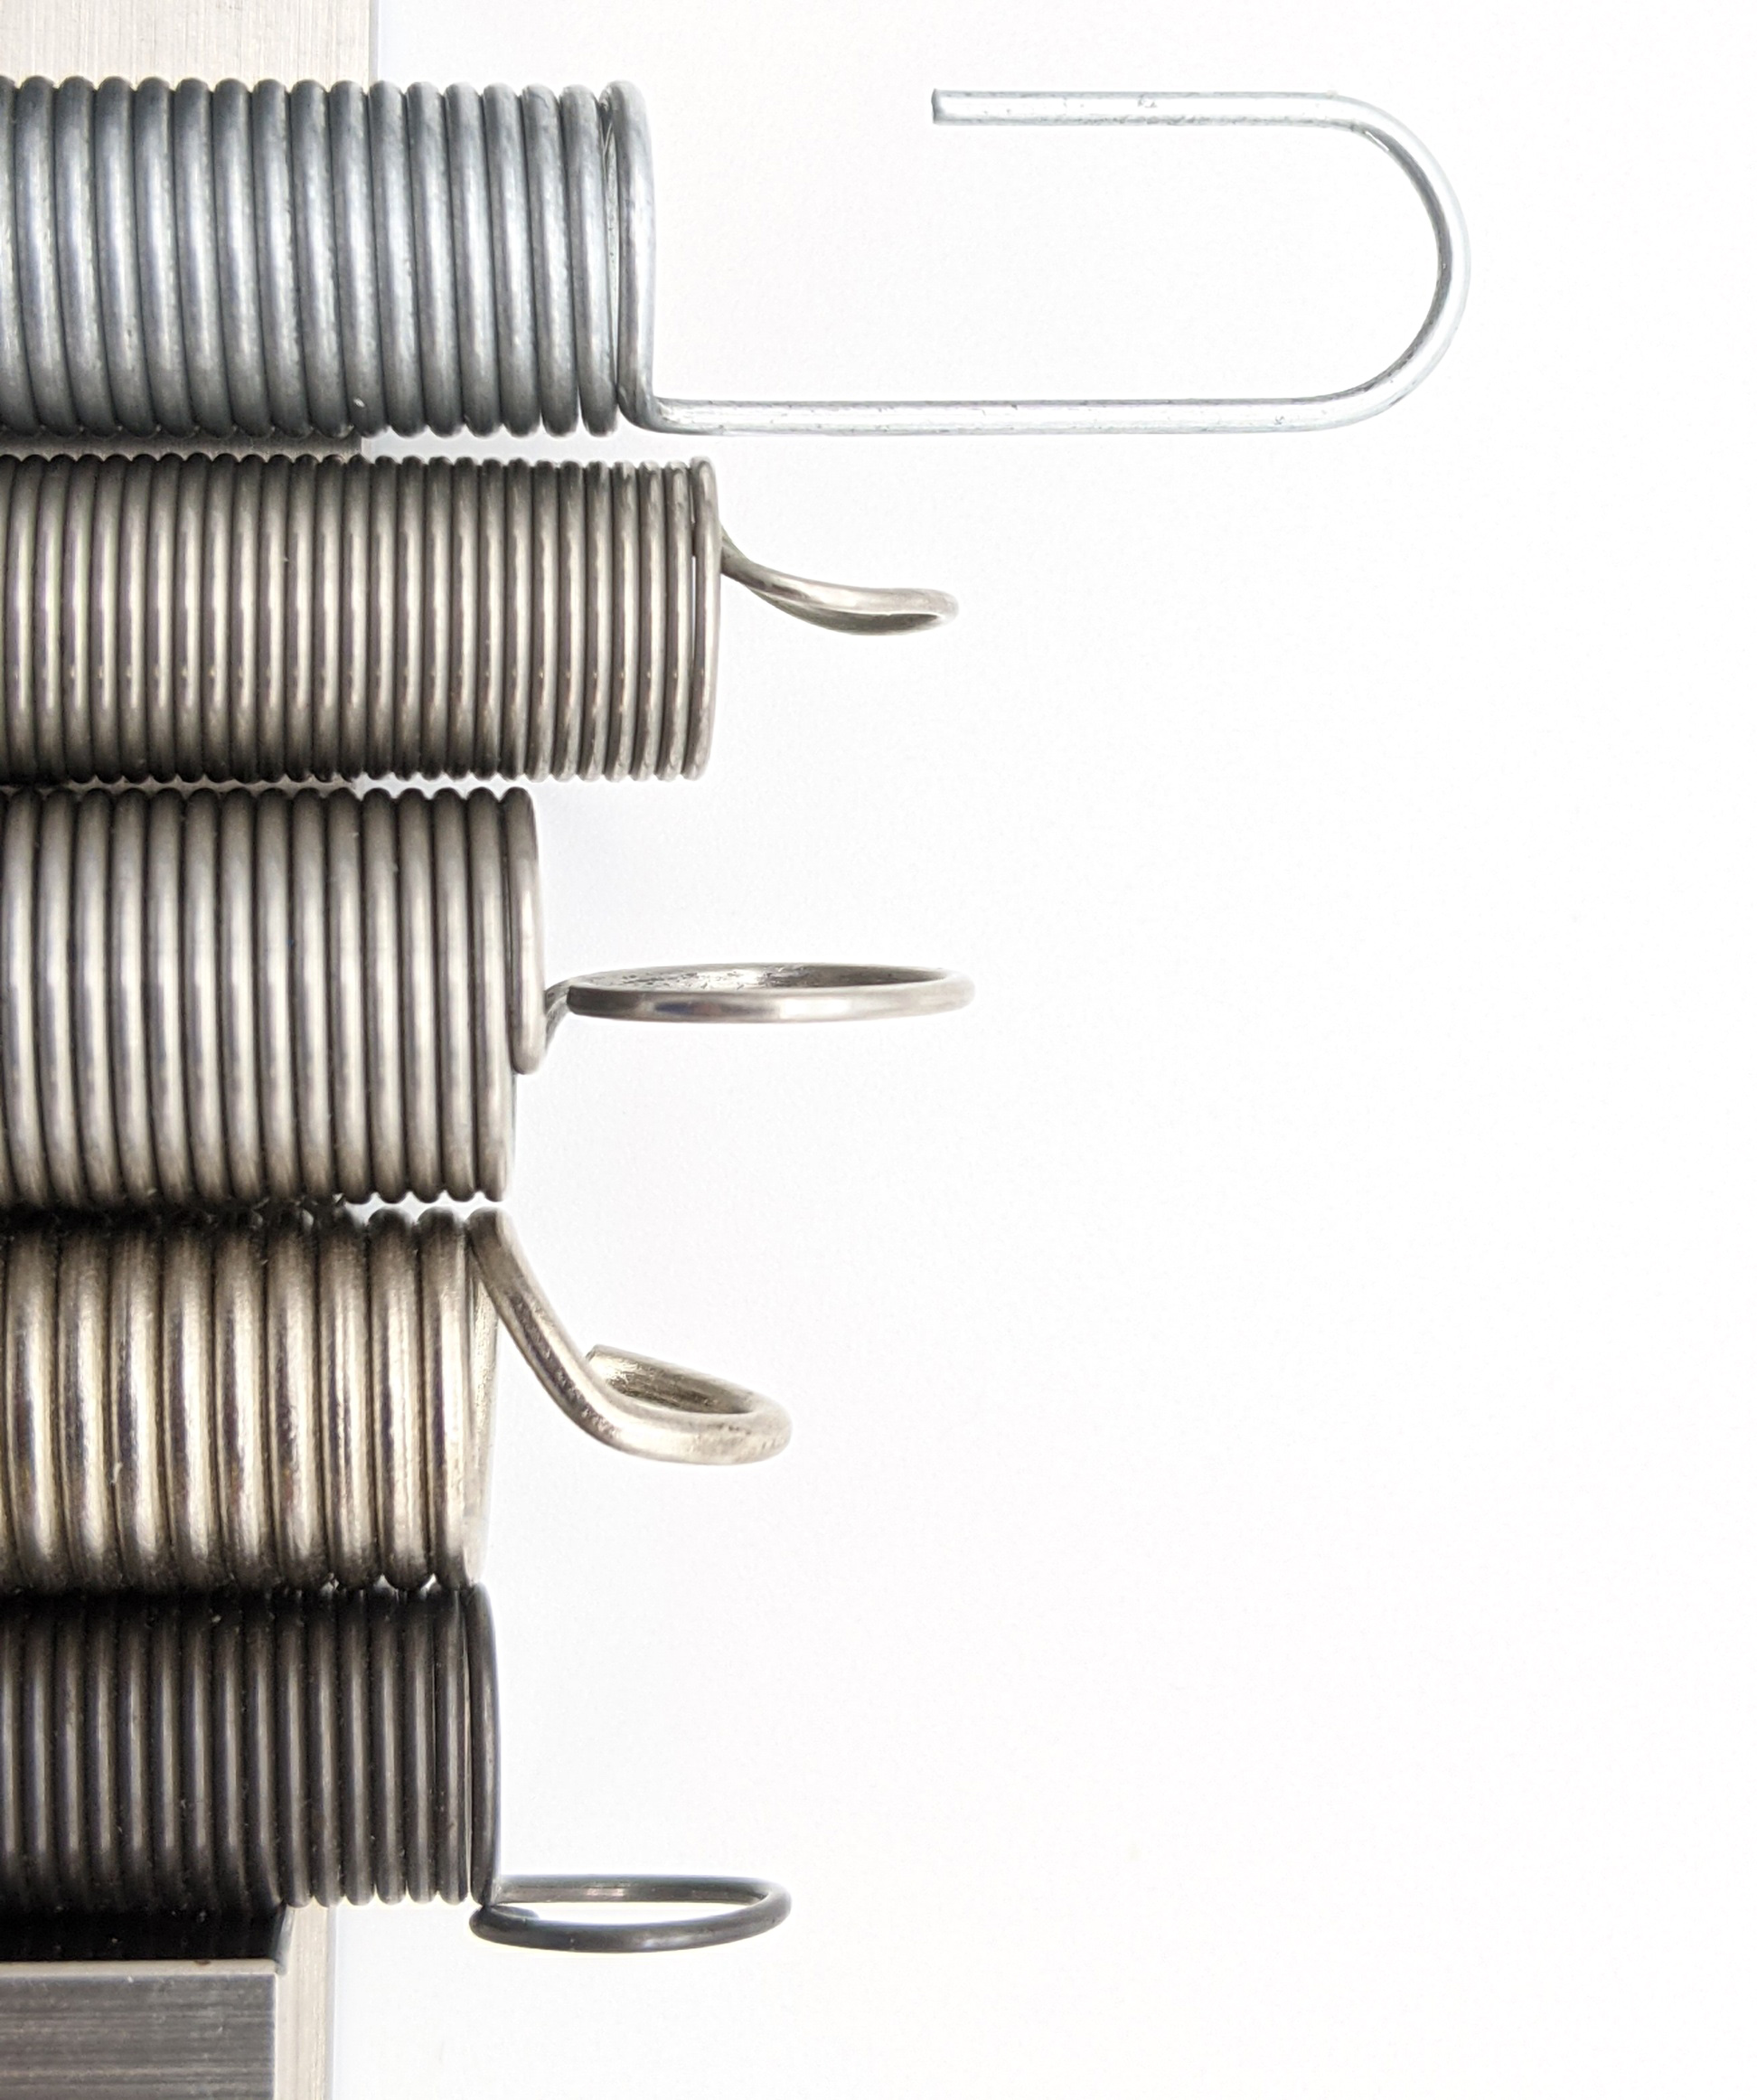 Details about   2mm Hook Expansion Extension Expanding Extending Tension Springs Spring Steel 